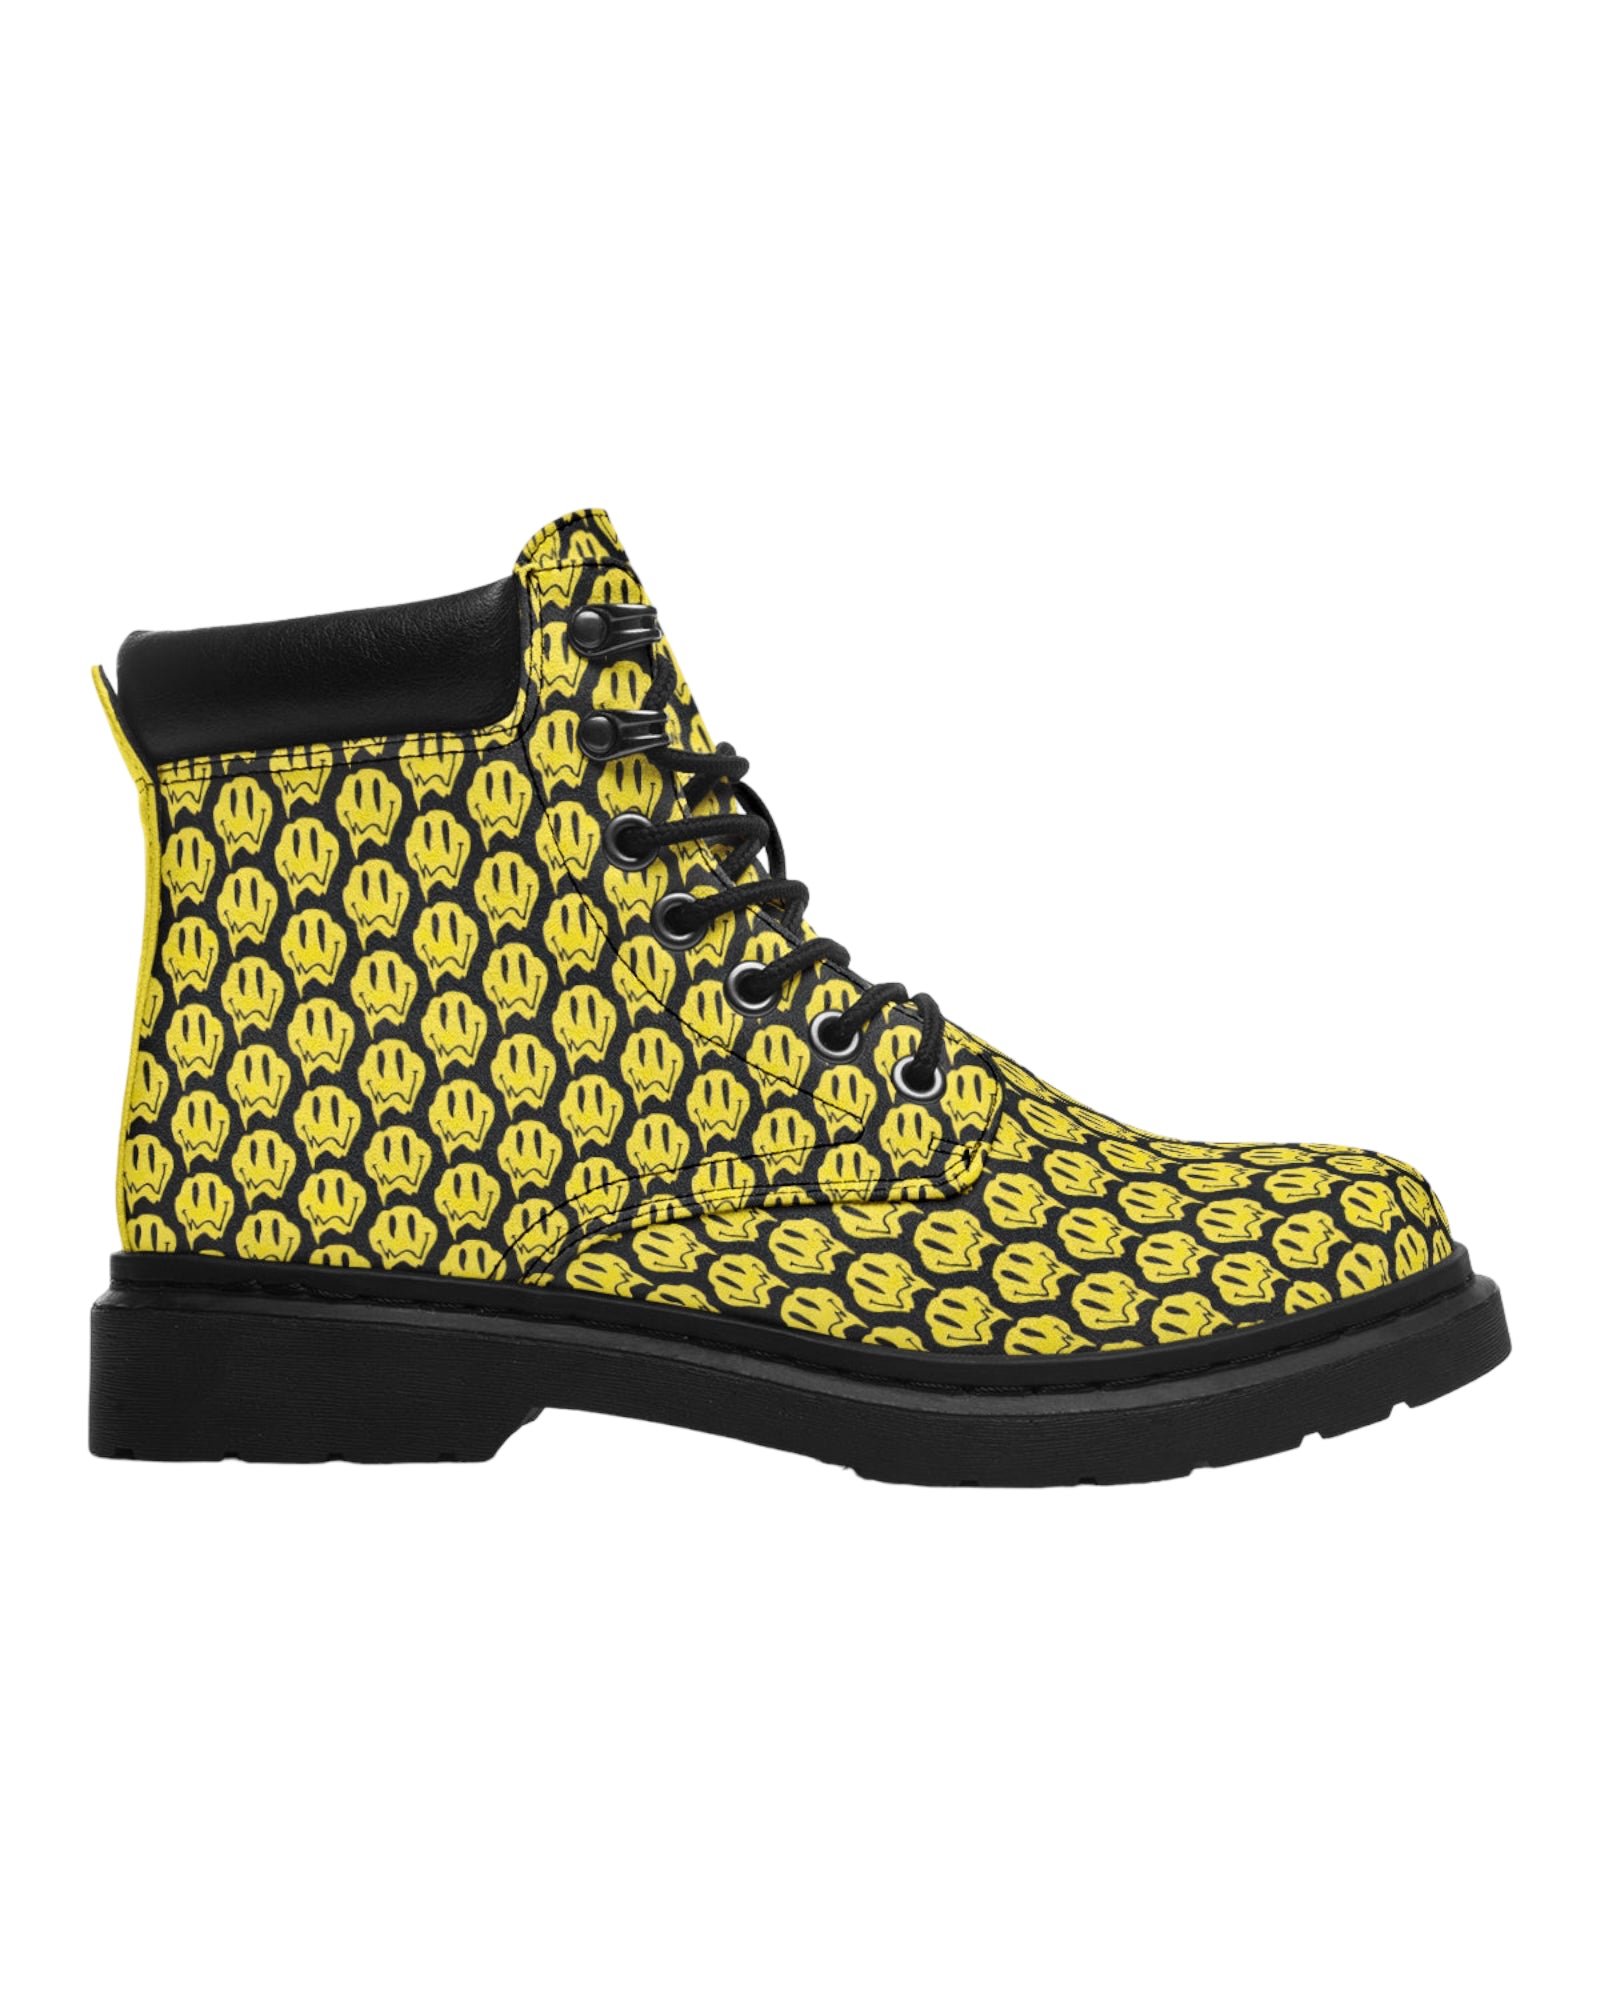 Stay Trippy Festival Boots